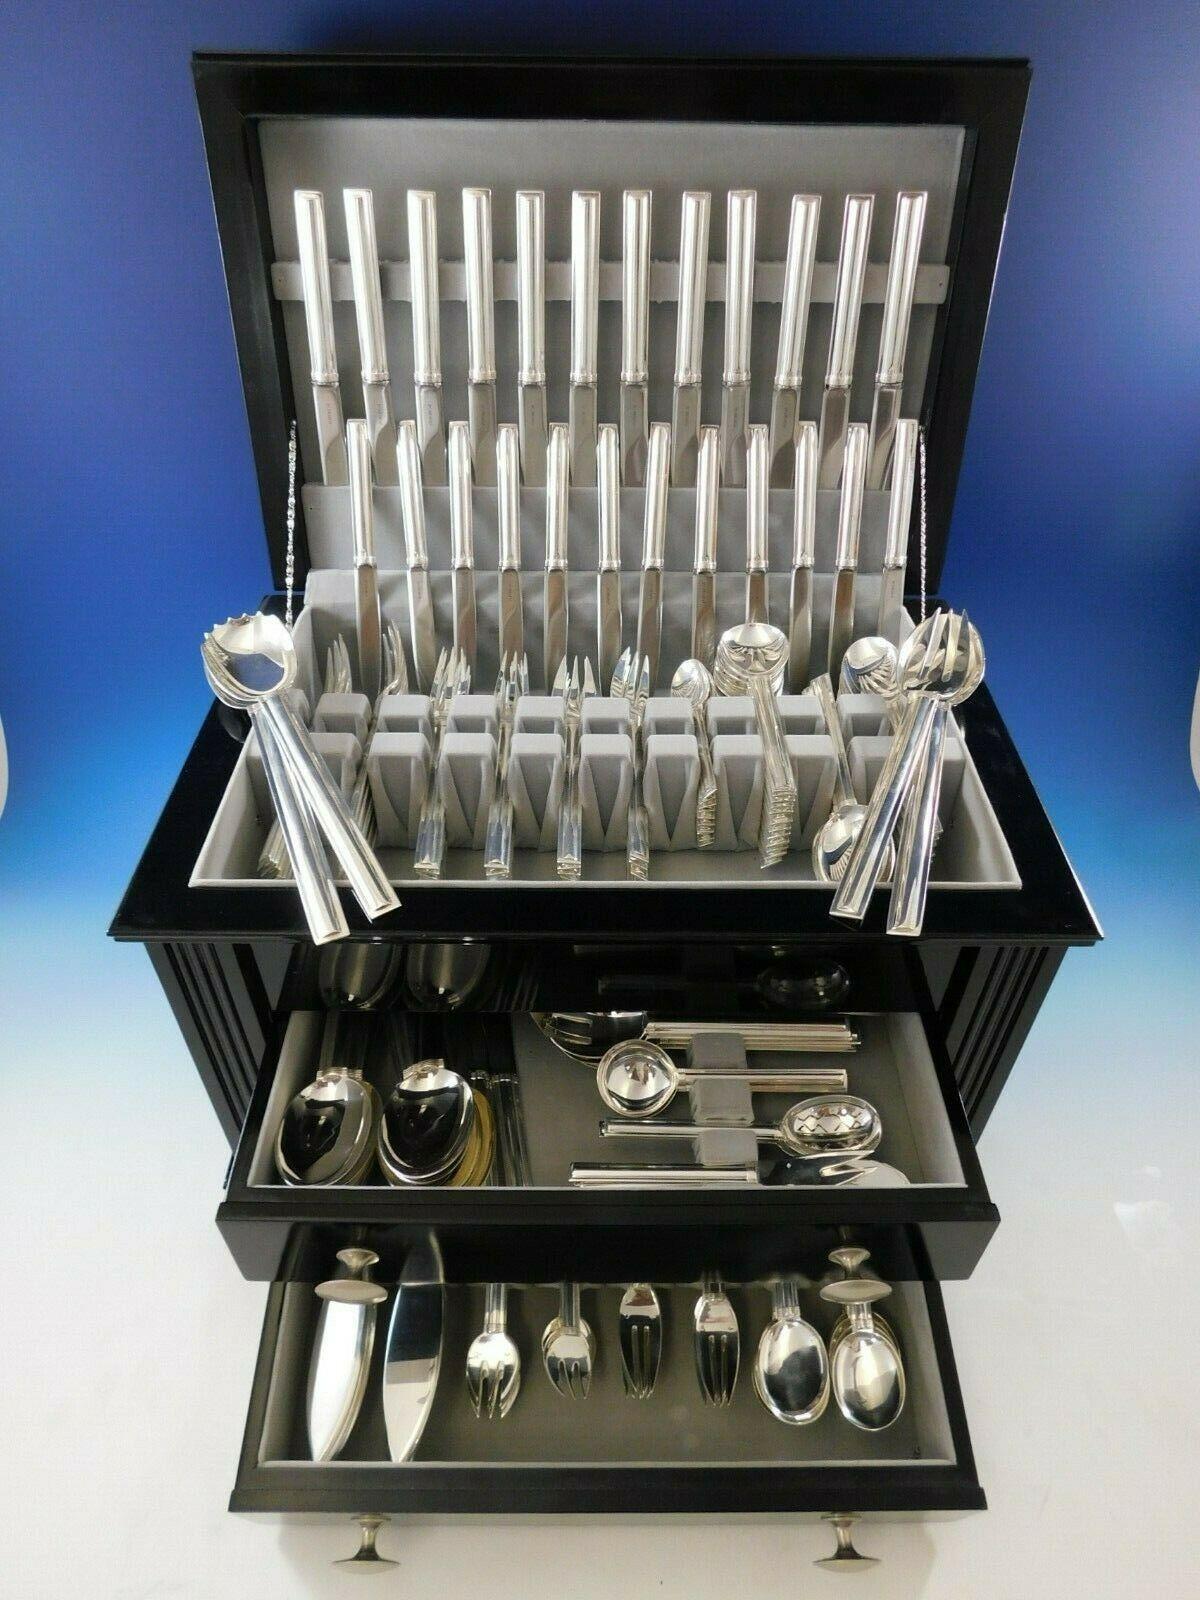 Large and impressive Cannes by Puiforcat France sterling silver flatware set, dinner and Luncheon size, 175 pieces. This set includes:

12 dinner knives, pointed, 9 1/8